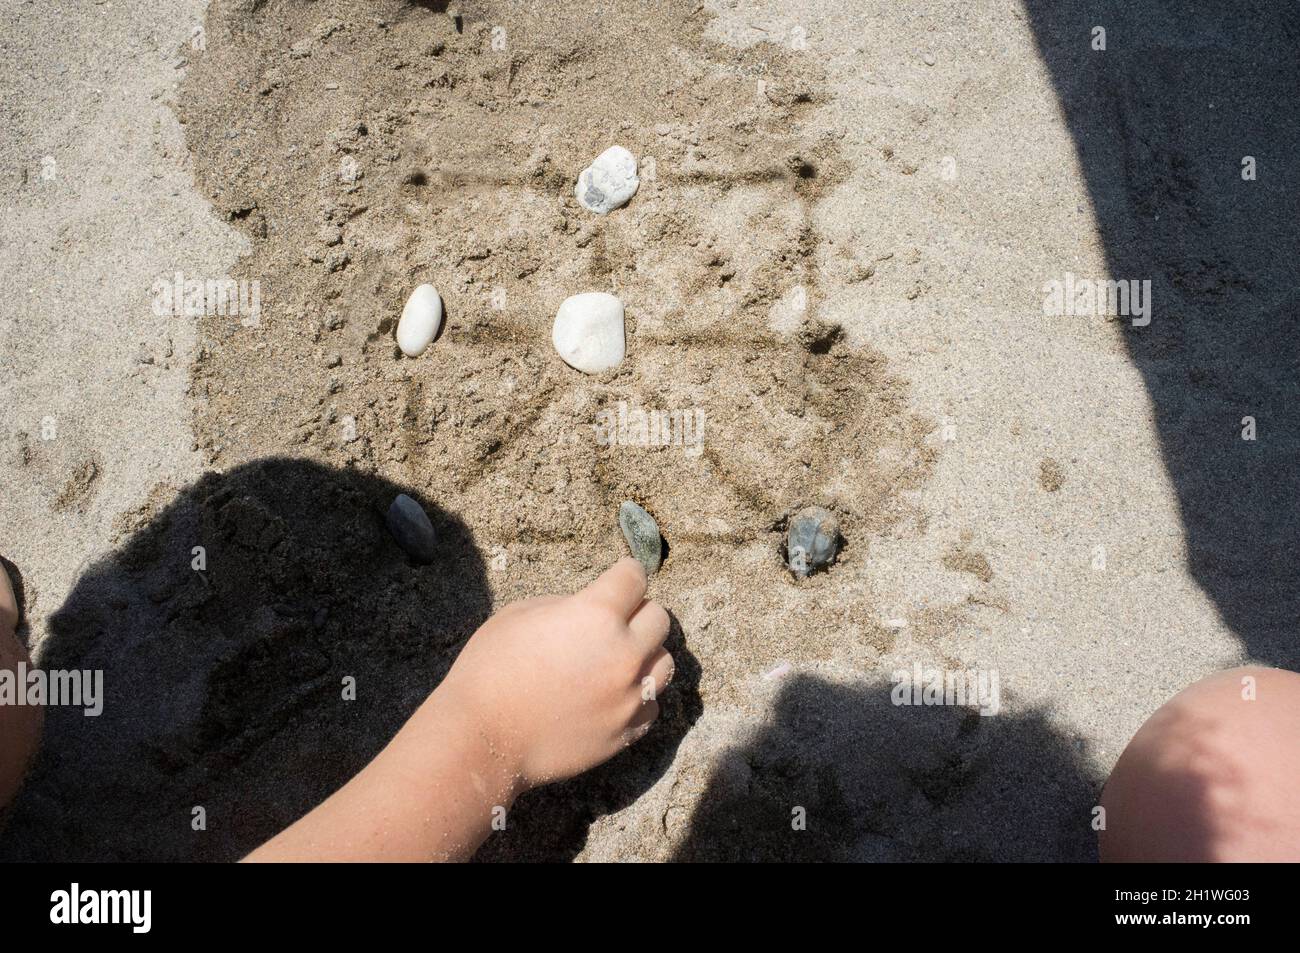 Children playing tic-tac-toe with natural board made with sand marks and beach pebbles. Overhead view Stock Photo